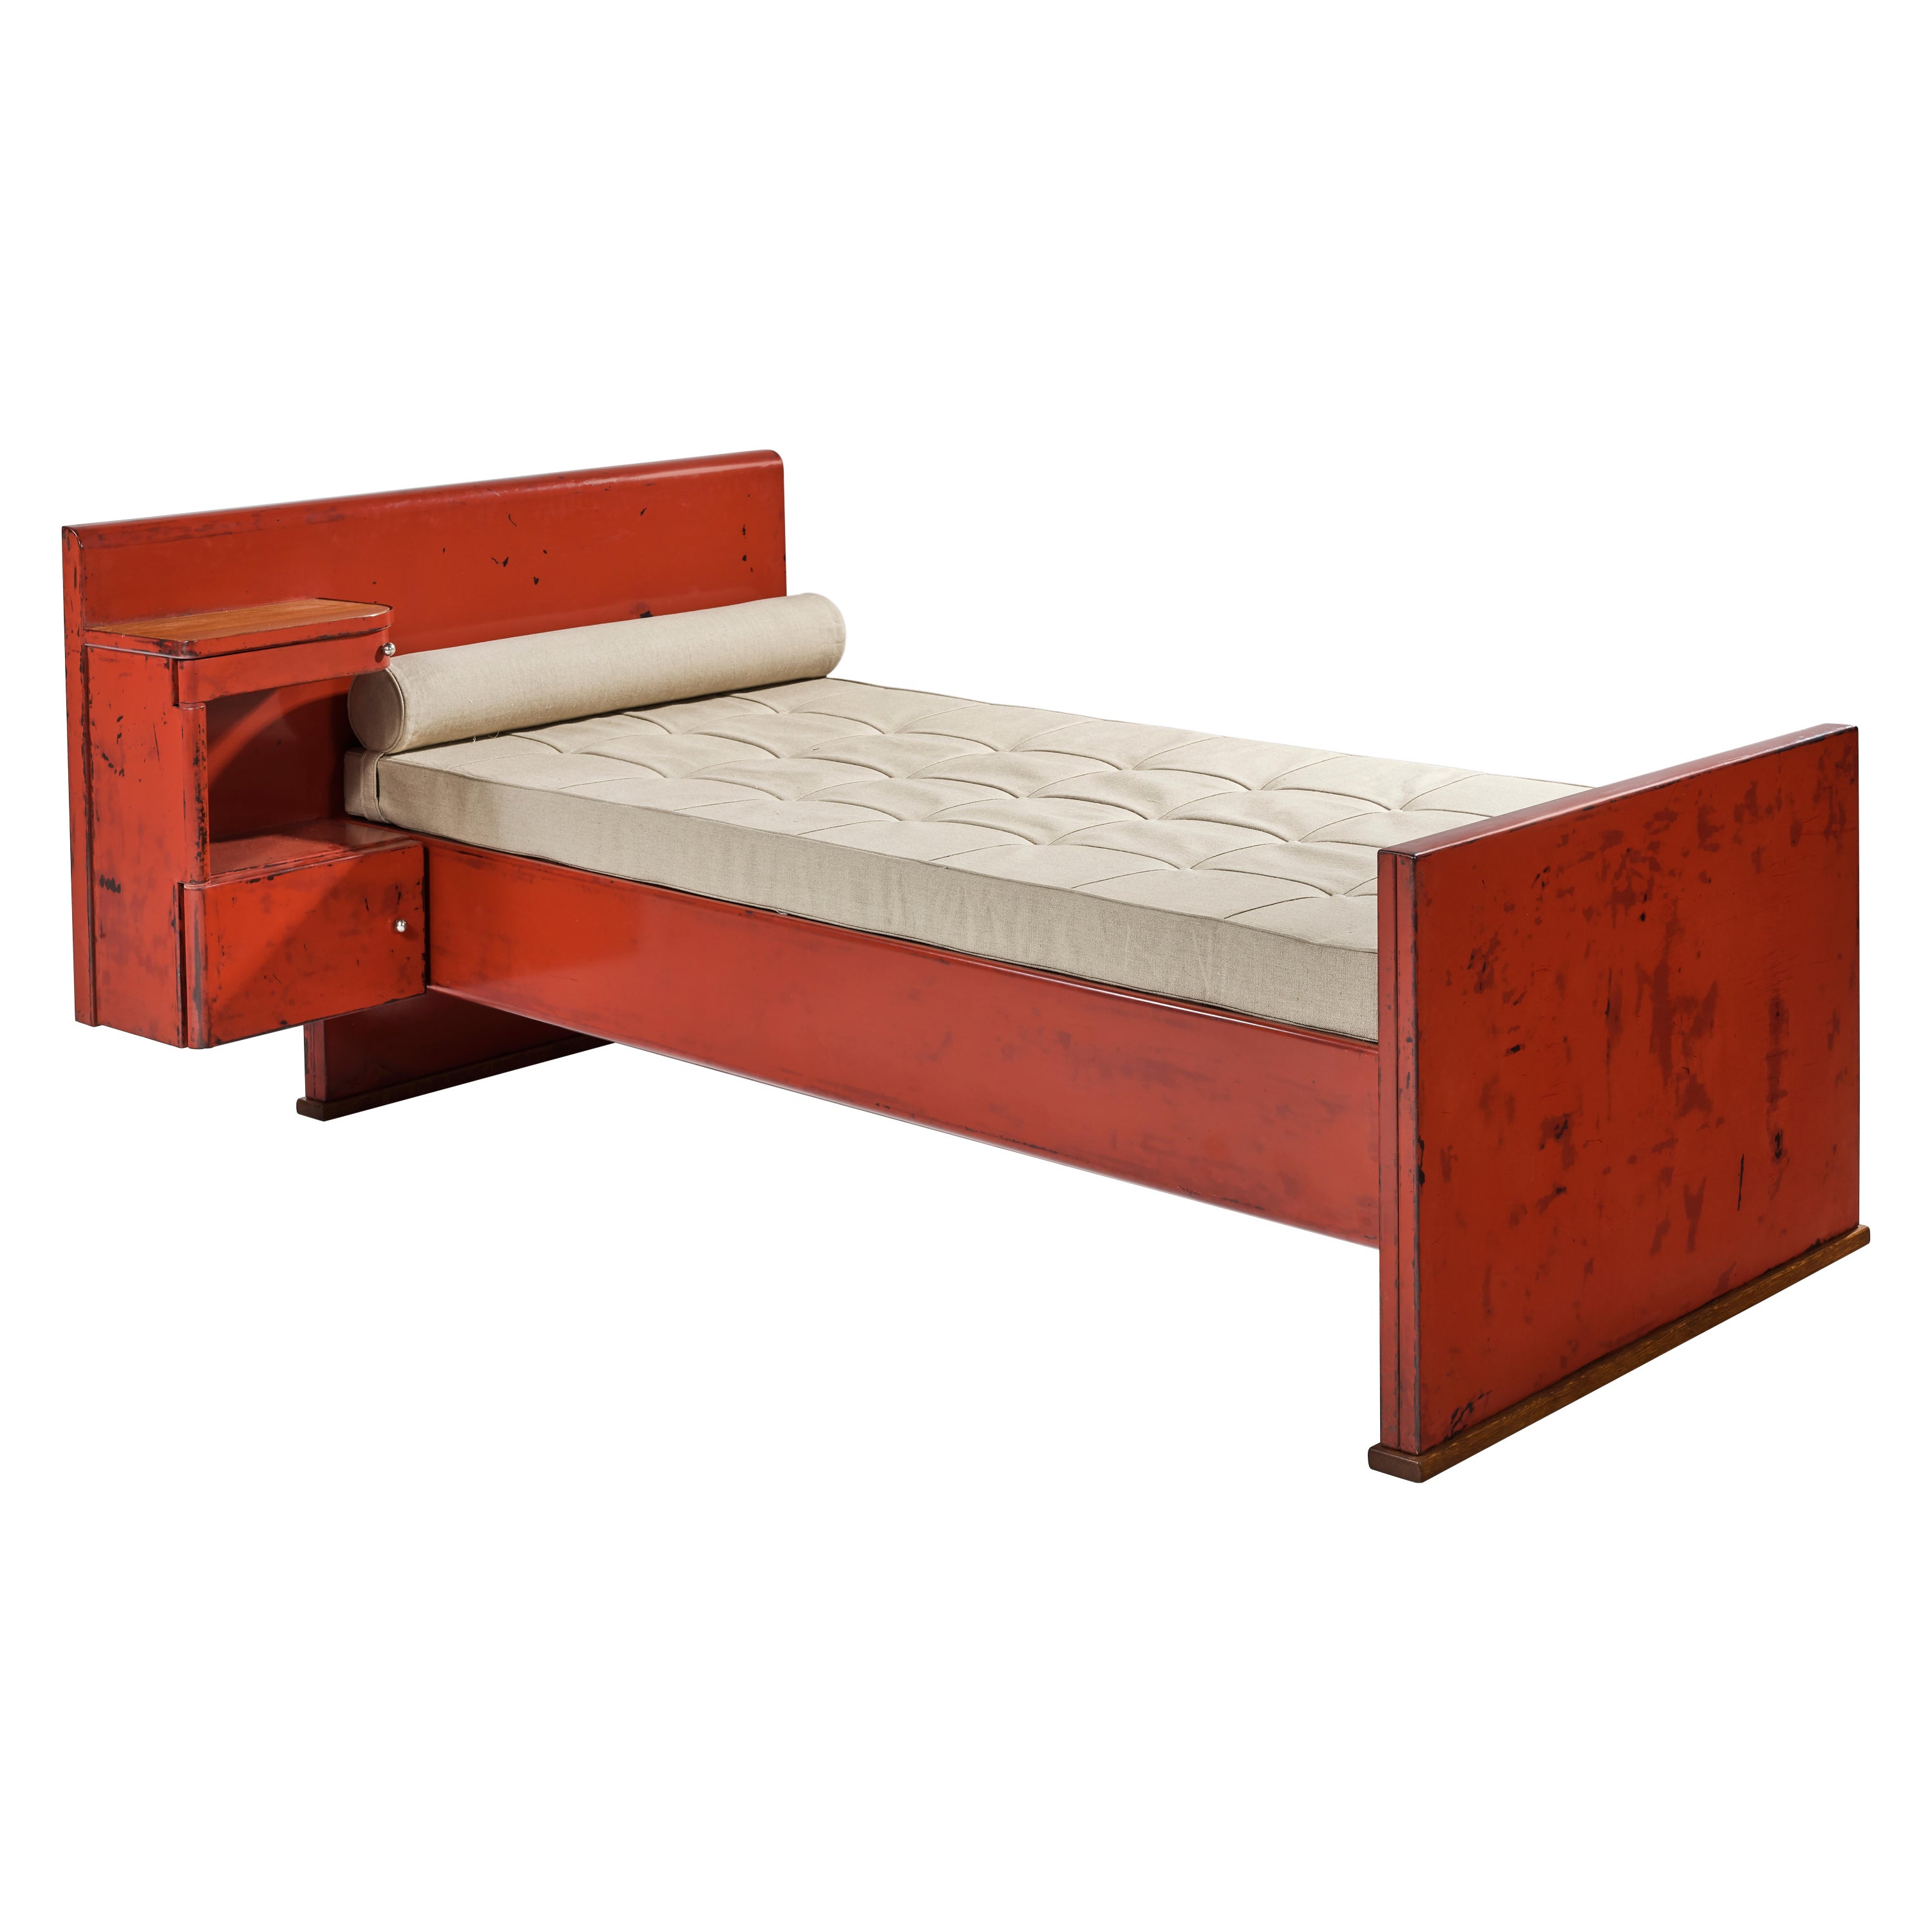 Jean Prouve, 1901-1984
France

Bed with integrated head, 1934 - 1935.
Demountable bed in folded and welded sheet steel, brick lacquer finish. Integrated head and bedside table has drawer and lower cupboard pivoting from single hinge, with shelf